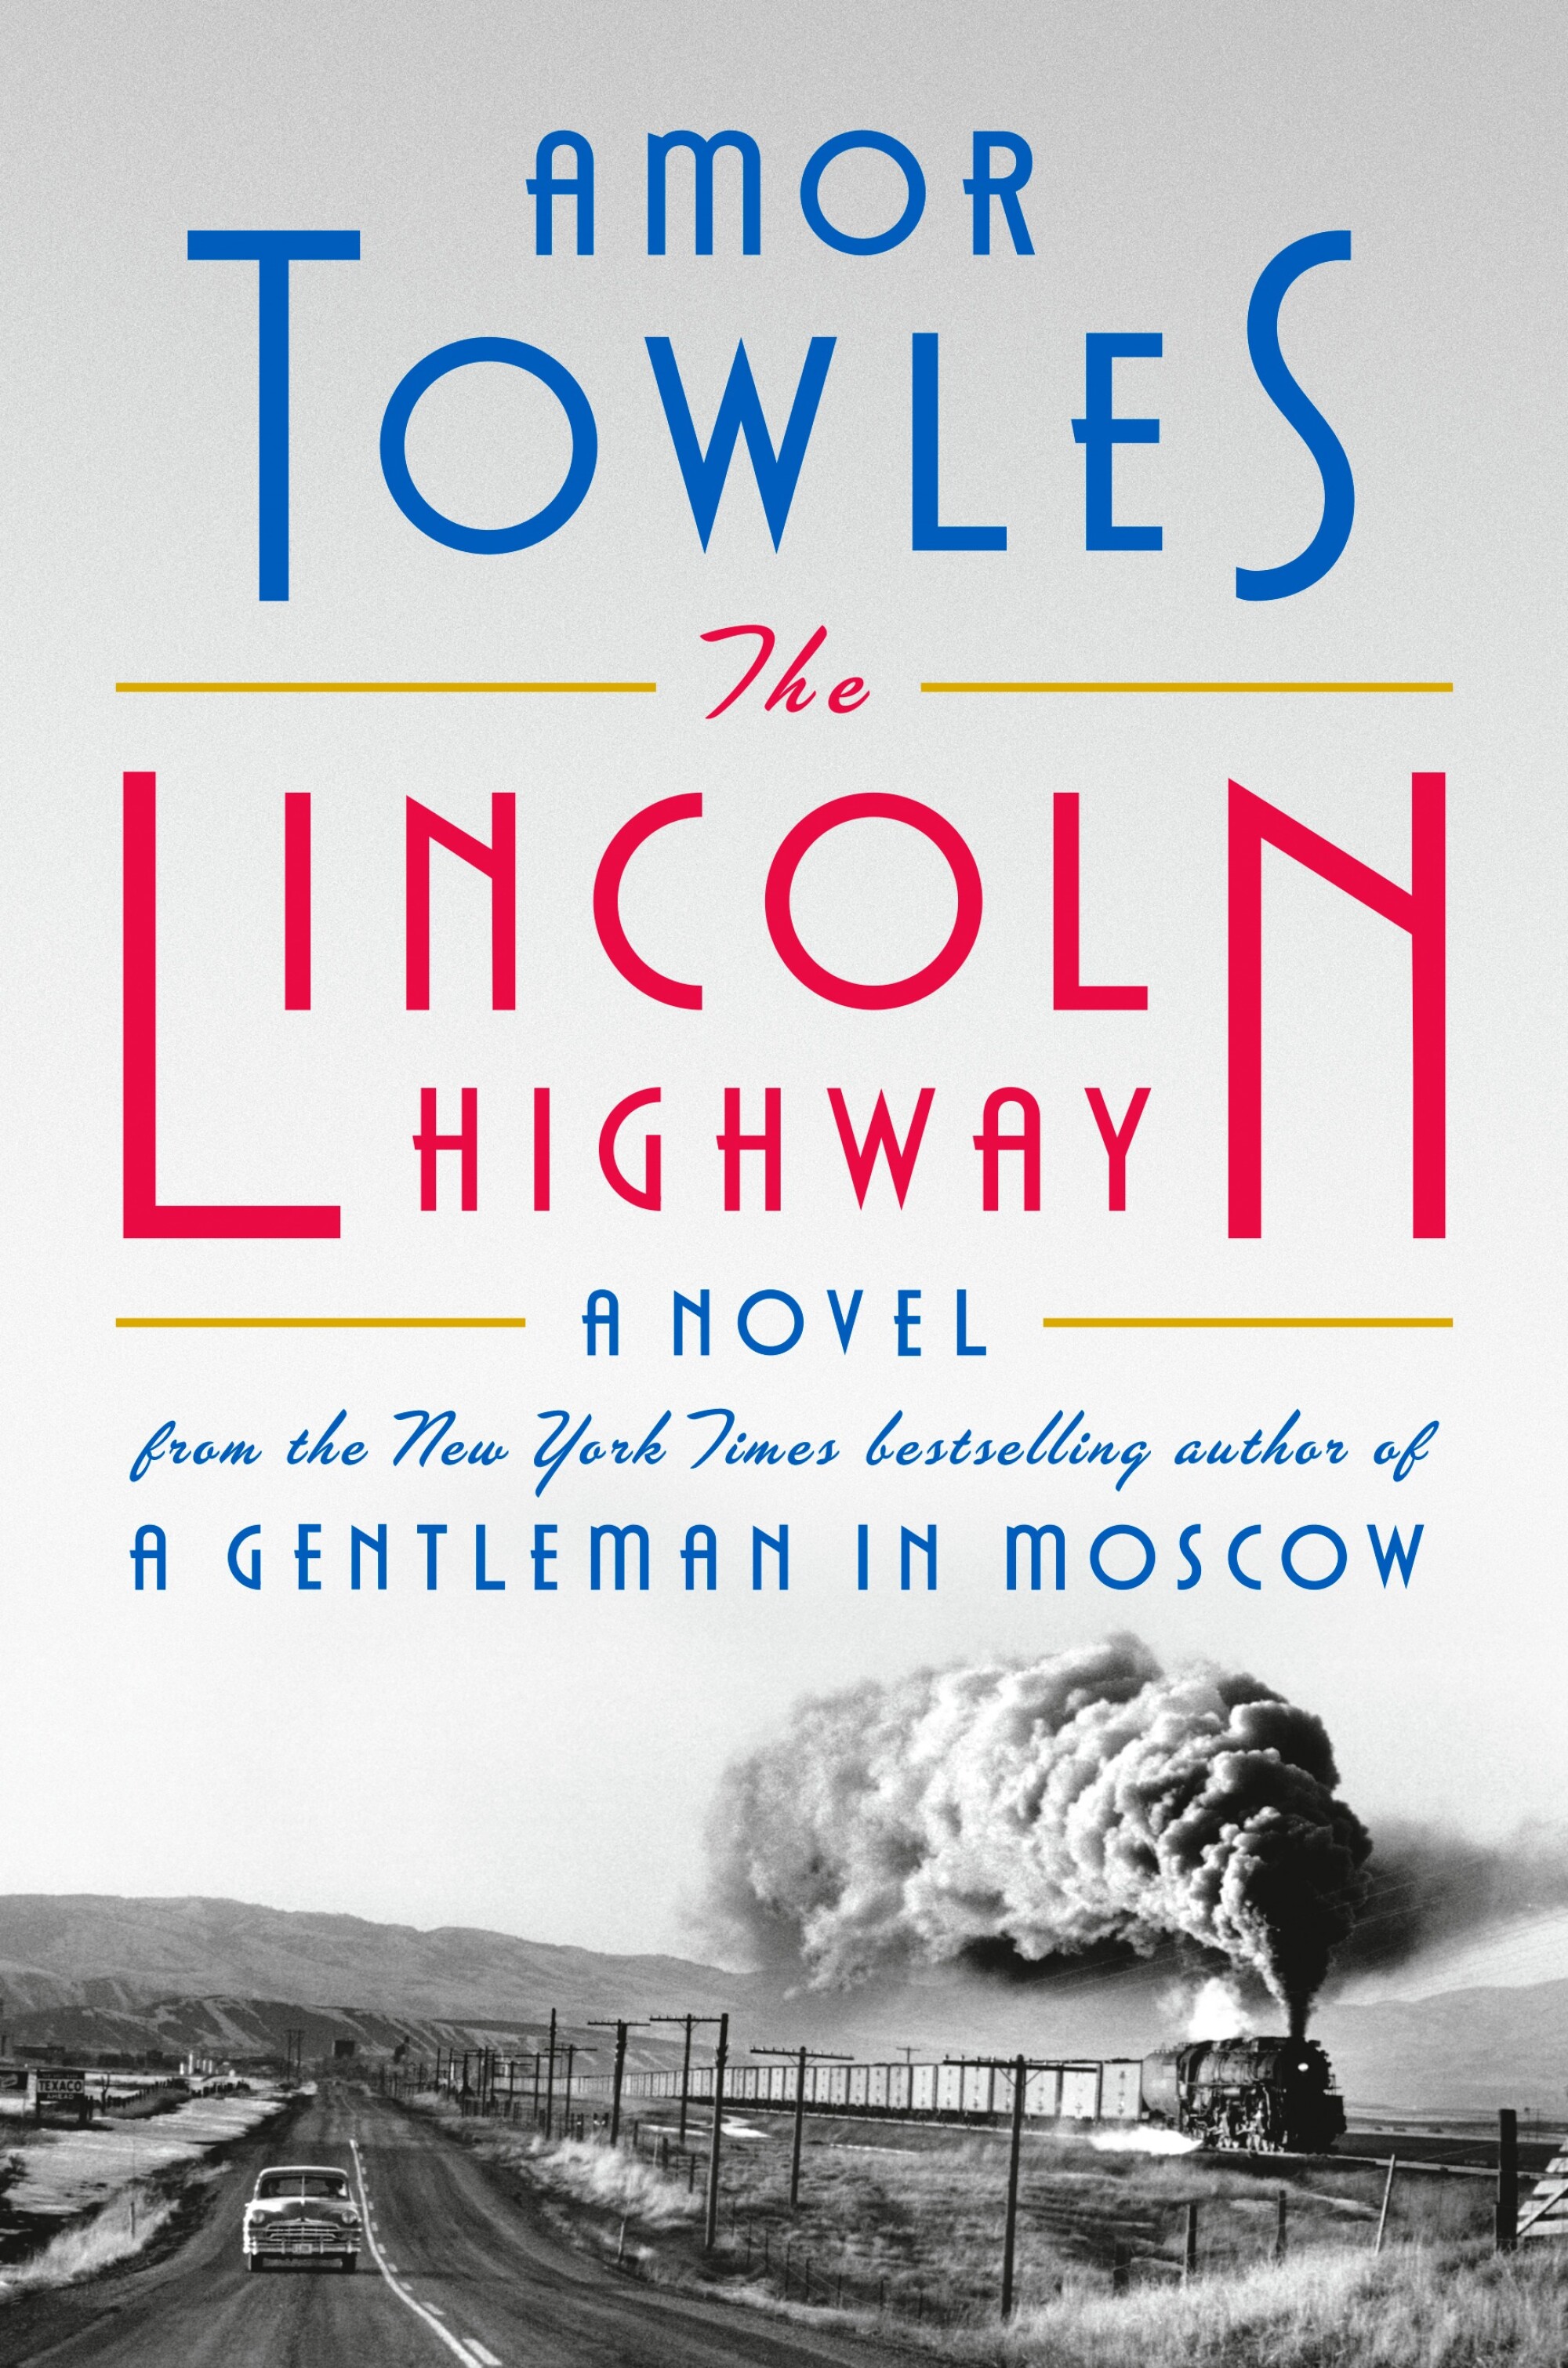 A black and white photograph of a vintage train and car on the cover of Amor Towles' 